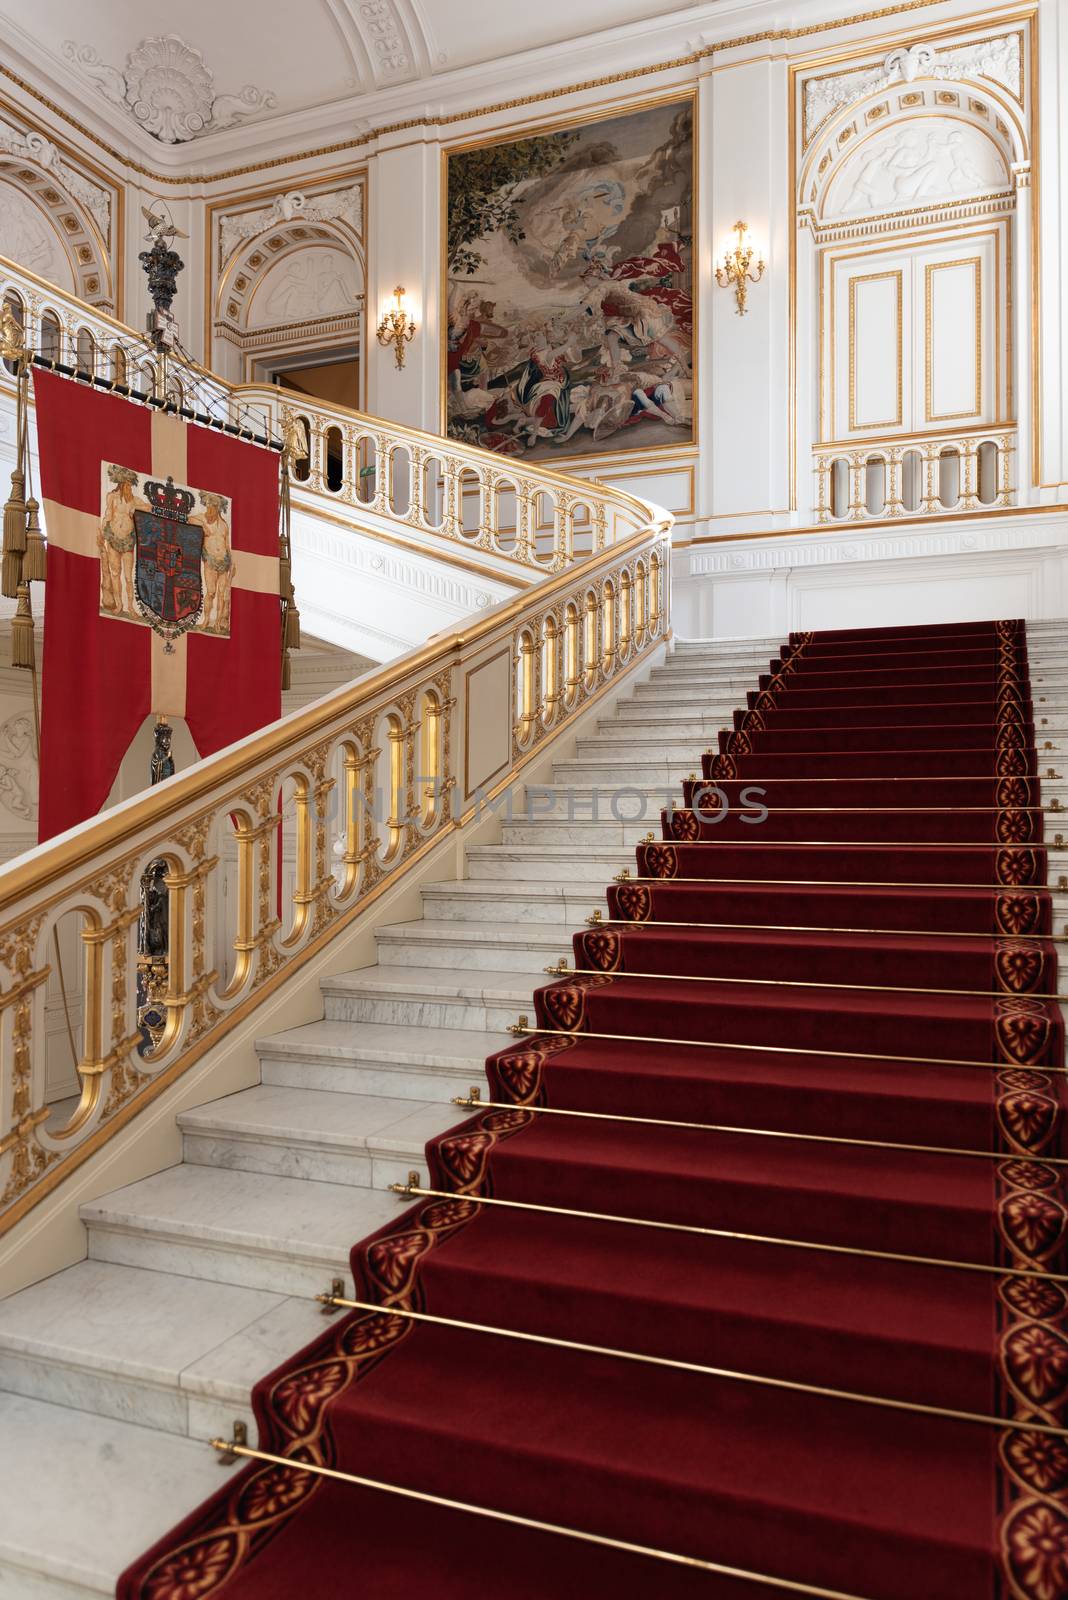 Interiors of royal halls in Christiansborg Palace in Copenhagen Denmark, ancient staircase